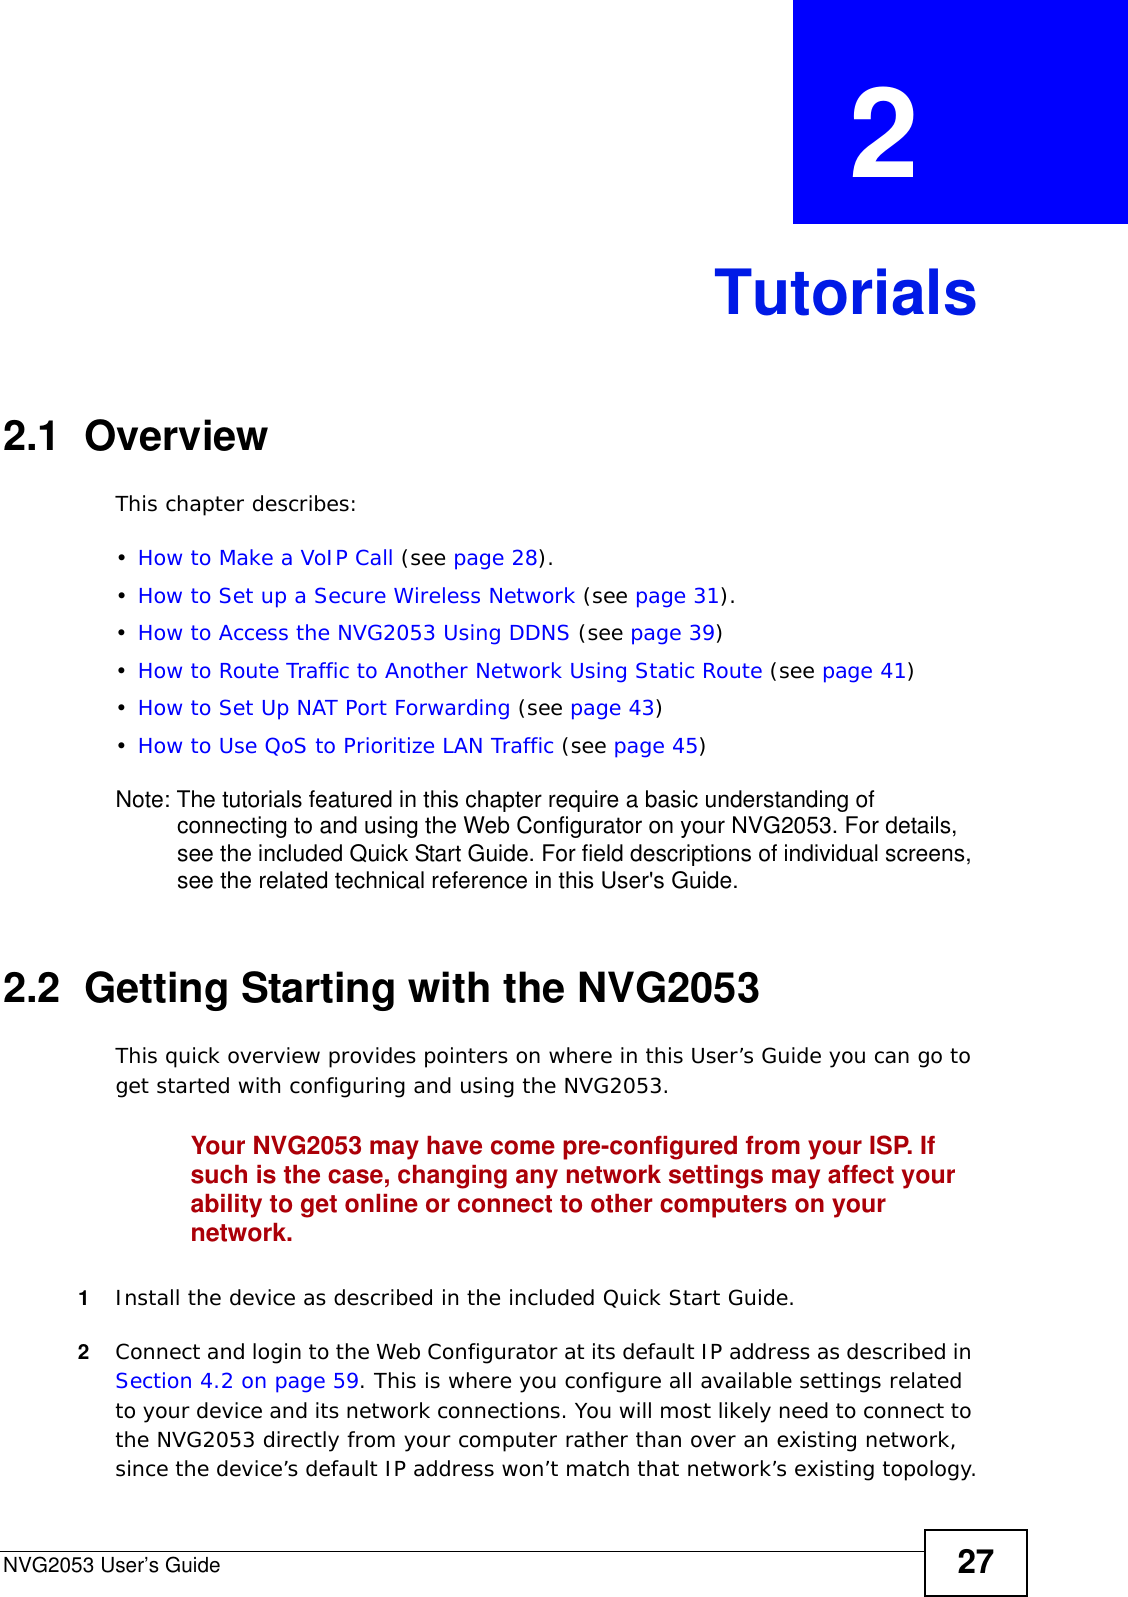 NVG2053 User’s Guide 27CHAPTER  2 Tutorials2.1  OverviewThis chapter describes:•How to Make a VoIP Call (see page 28).•How to Set up a Secure Wireless Network (see page 31).•How to Access the NVG2053 Using DDNS (see page 39)•How to Route Traffic to Another Network Using Static Route (see page 41)•How to Set Up NAT Port Forwarding (see page 43)•How to Use QoS to Prioritize LAN Traffic (see page 45)Note: The tutorials featured in this chapter require a basic understanding of connecting to and using the Web Configurator on your NVG2053. For details, see the included Quick Start Guide. For field descriptions of individual screens, see the related technical reference in this User&apos;s Guide.2.2  Getting Starting with the NVG2053This quick overview provides pointers on where in this User’s Guide you can go to get started with configuring and using the NVG2053.Your NVG2053 may have come pre-configured from your ISP. If such is the case, changing any network settings may affect your ability to get online or connect to other computers on your network.1Install the device as described in the included Quick Start Guide.2Connect and login to the Web Configurator at its default IP address as described in Section 4.2 on page 59. This is where you configure all available settings related to your device and its network connections. You will most likely need to connect to the NVG2053 directly from your computer rather than over an existing network, since the device’s default IP address won’t match that network’s existing topology.